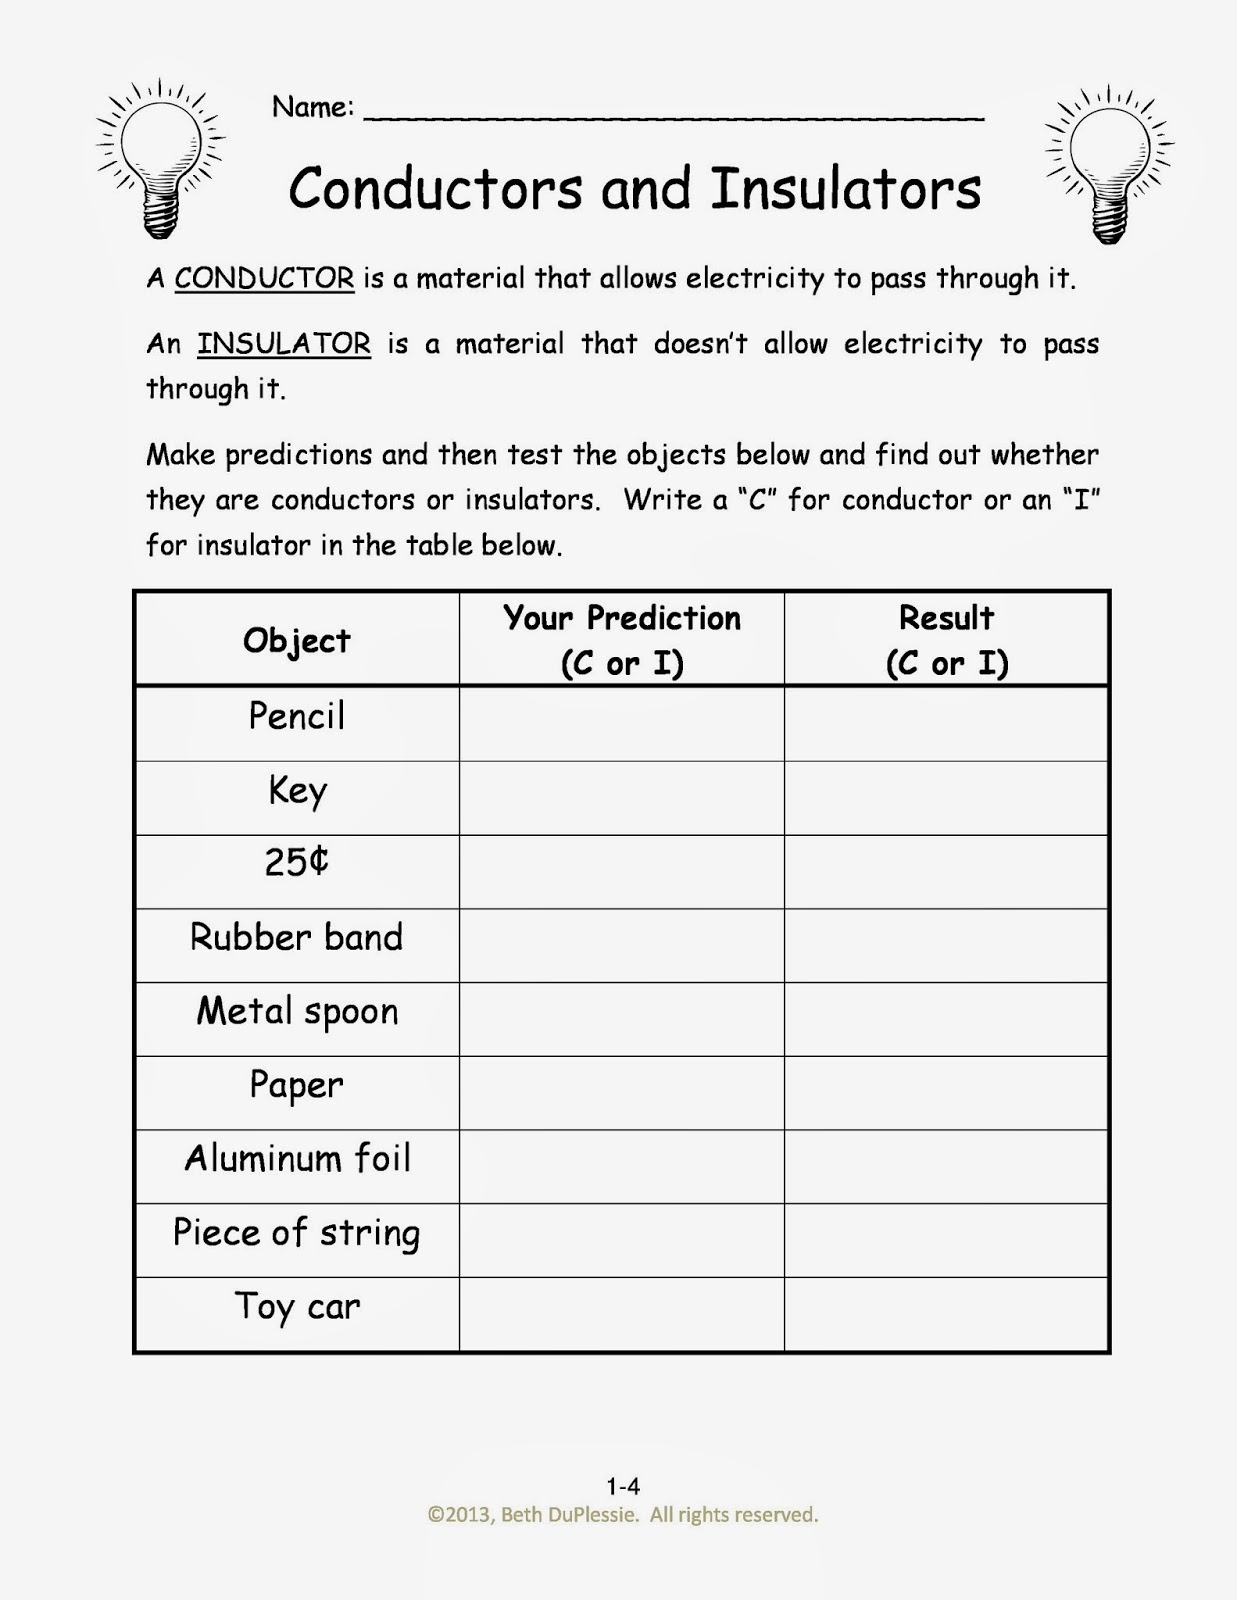 Conductors And Insulators Lesson Plans 11th Grade  Lesson Plans Pertaining To Conductors And Insulators Worksheet